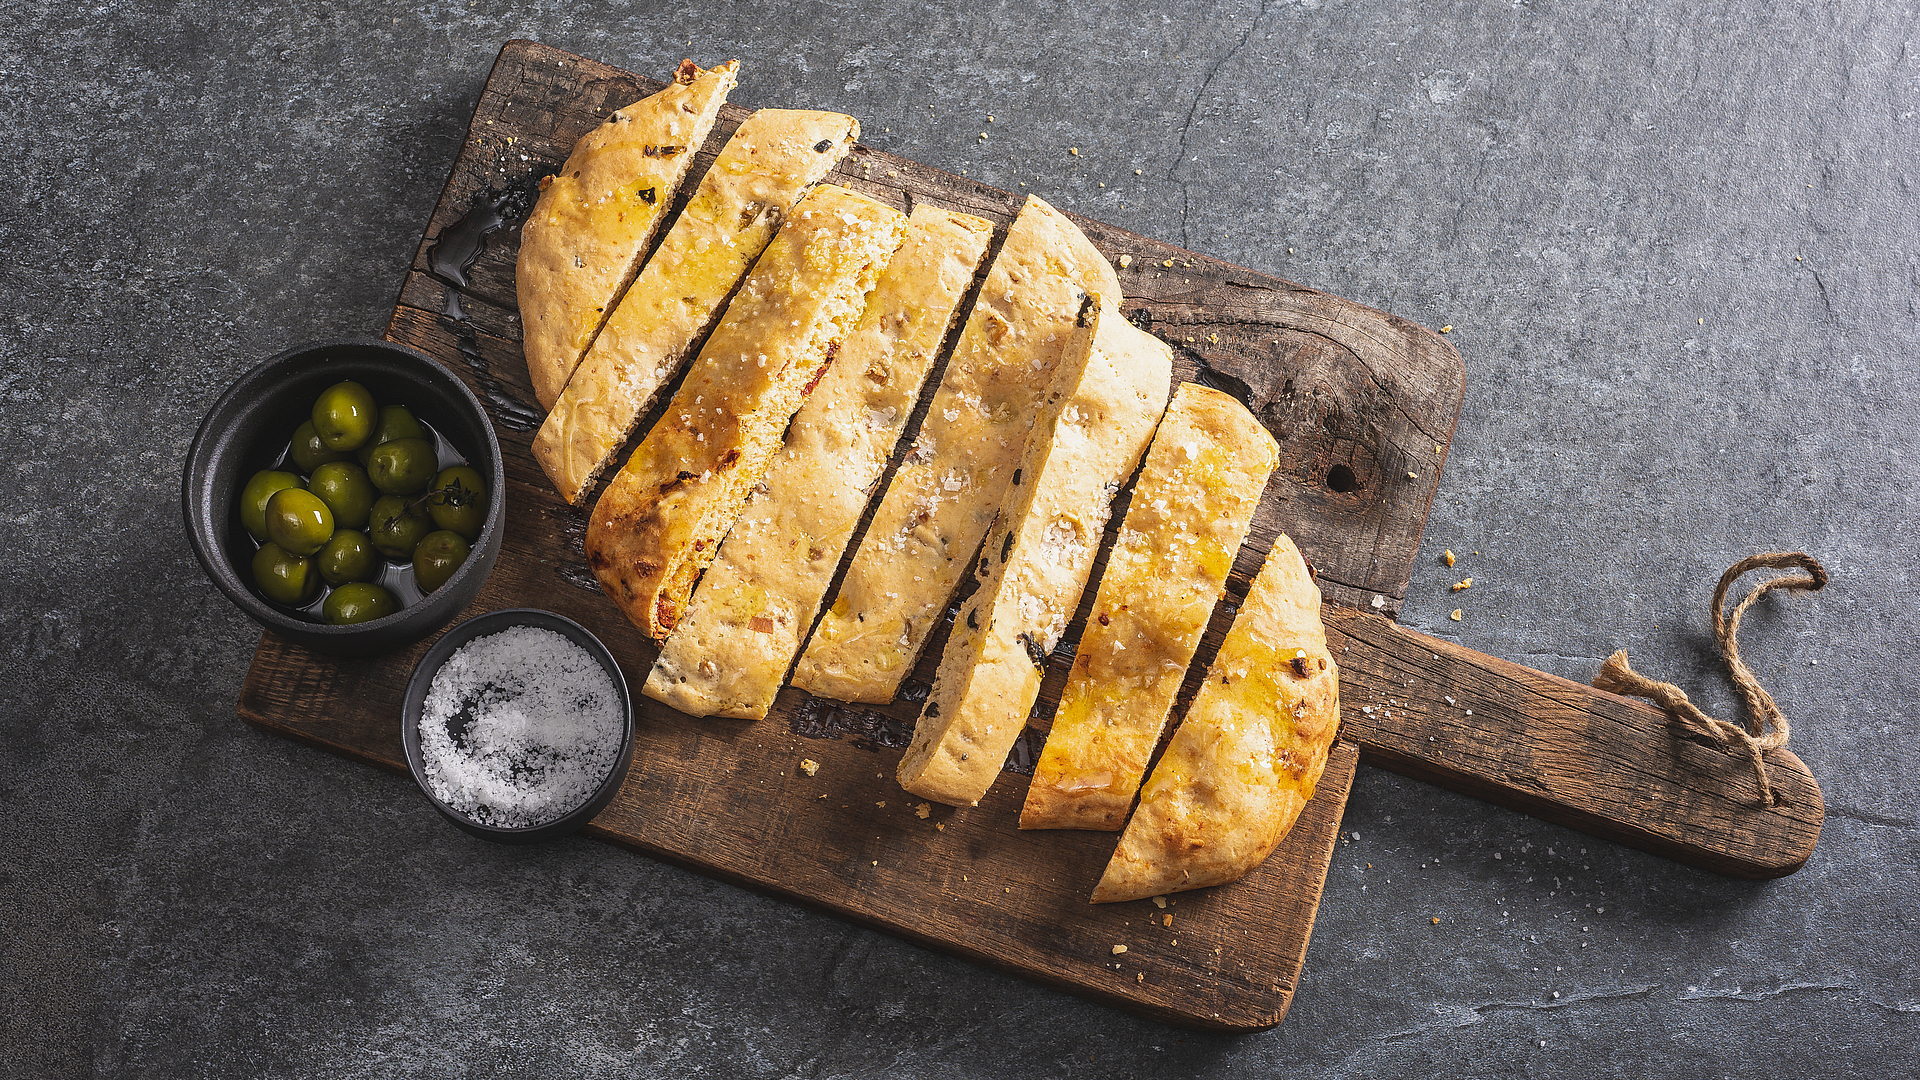 Focaccia with porcini mushrooms, tomatoes or olives